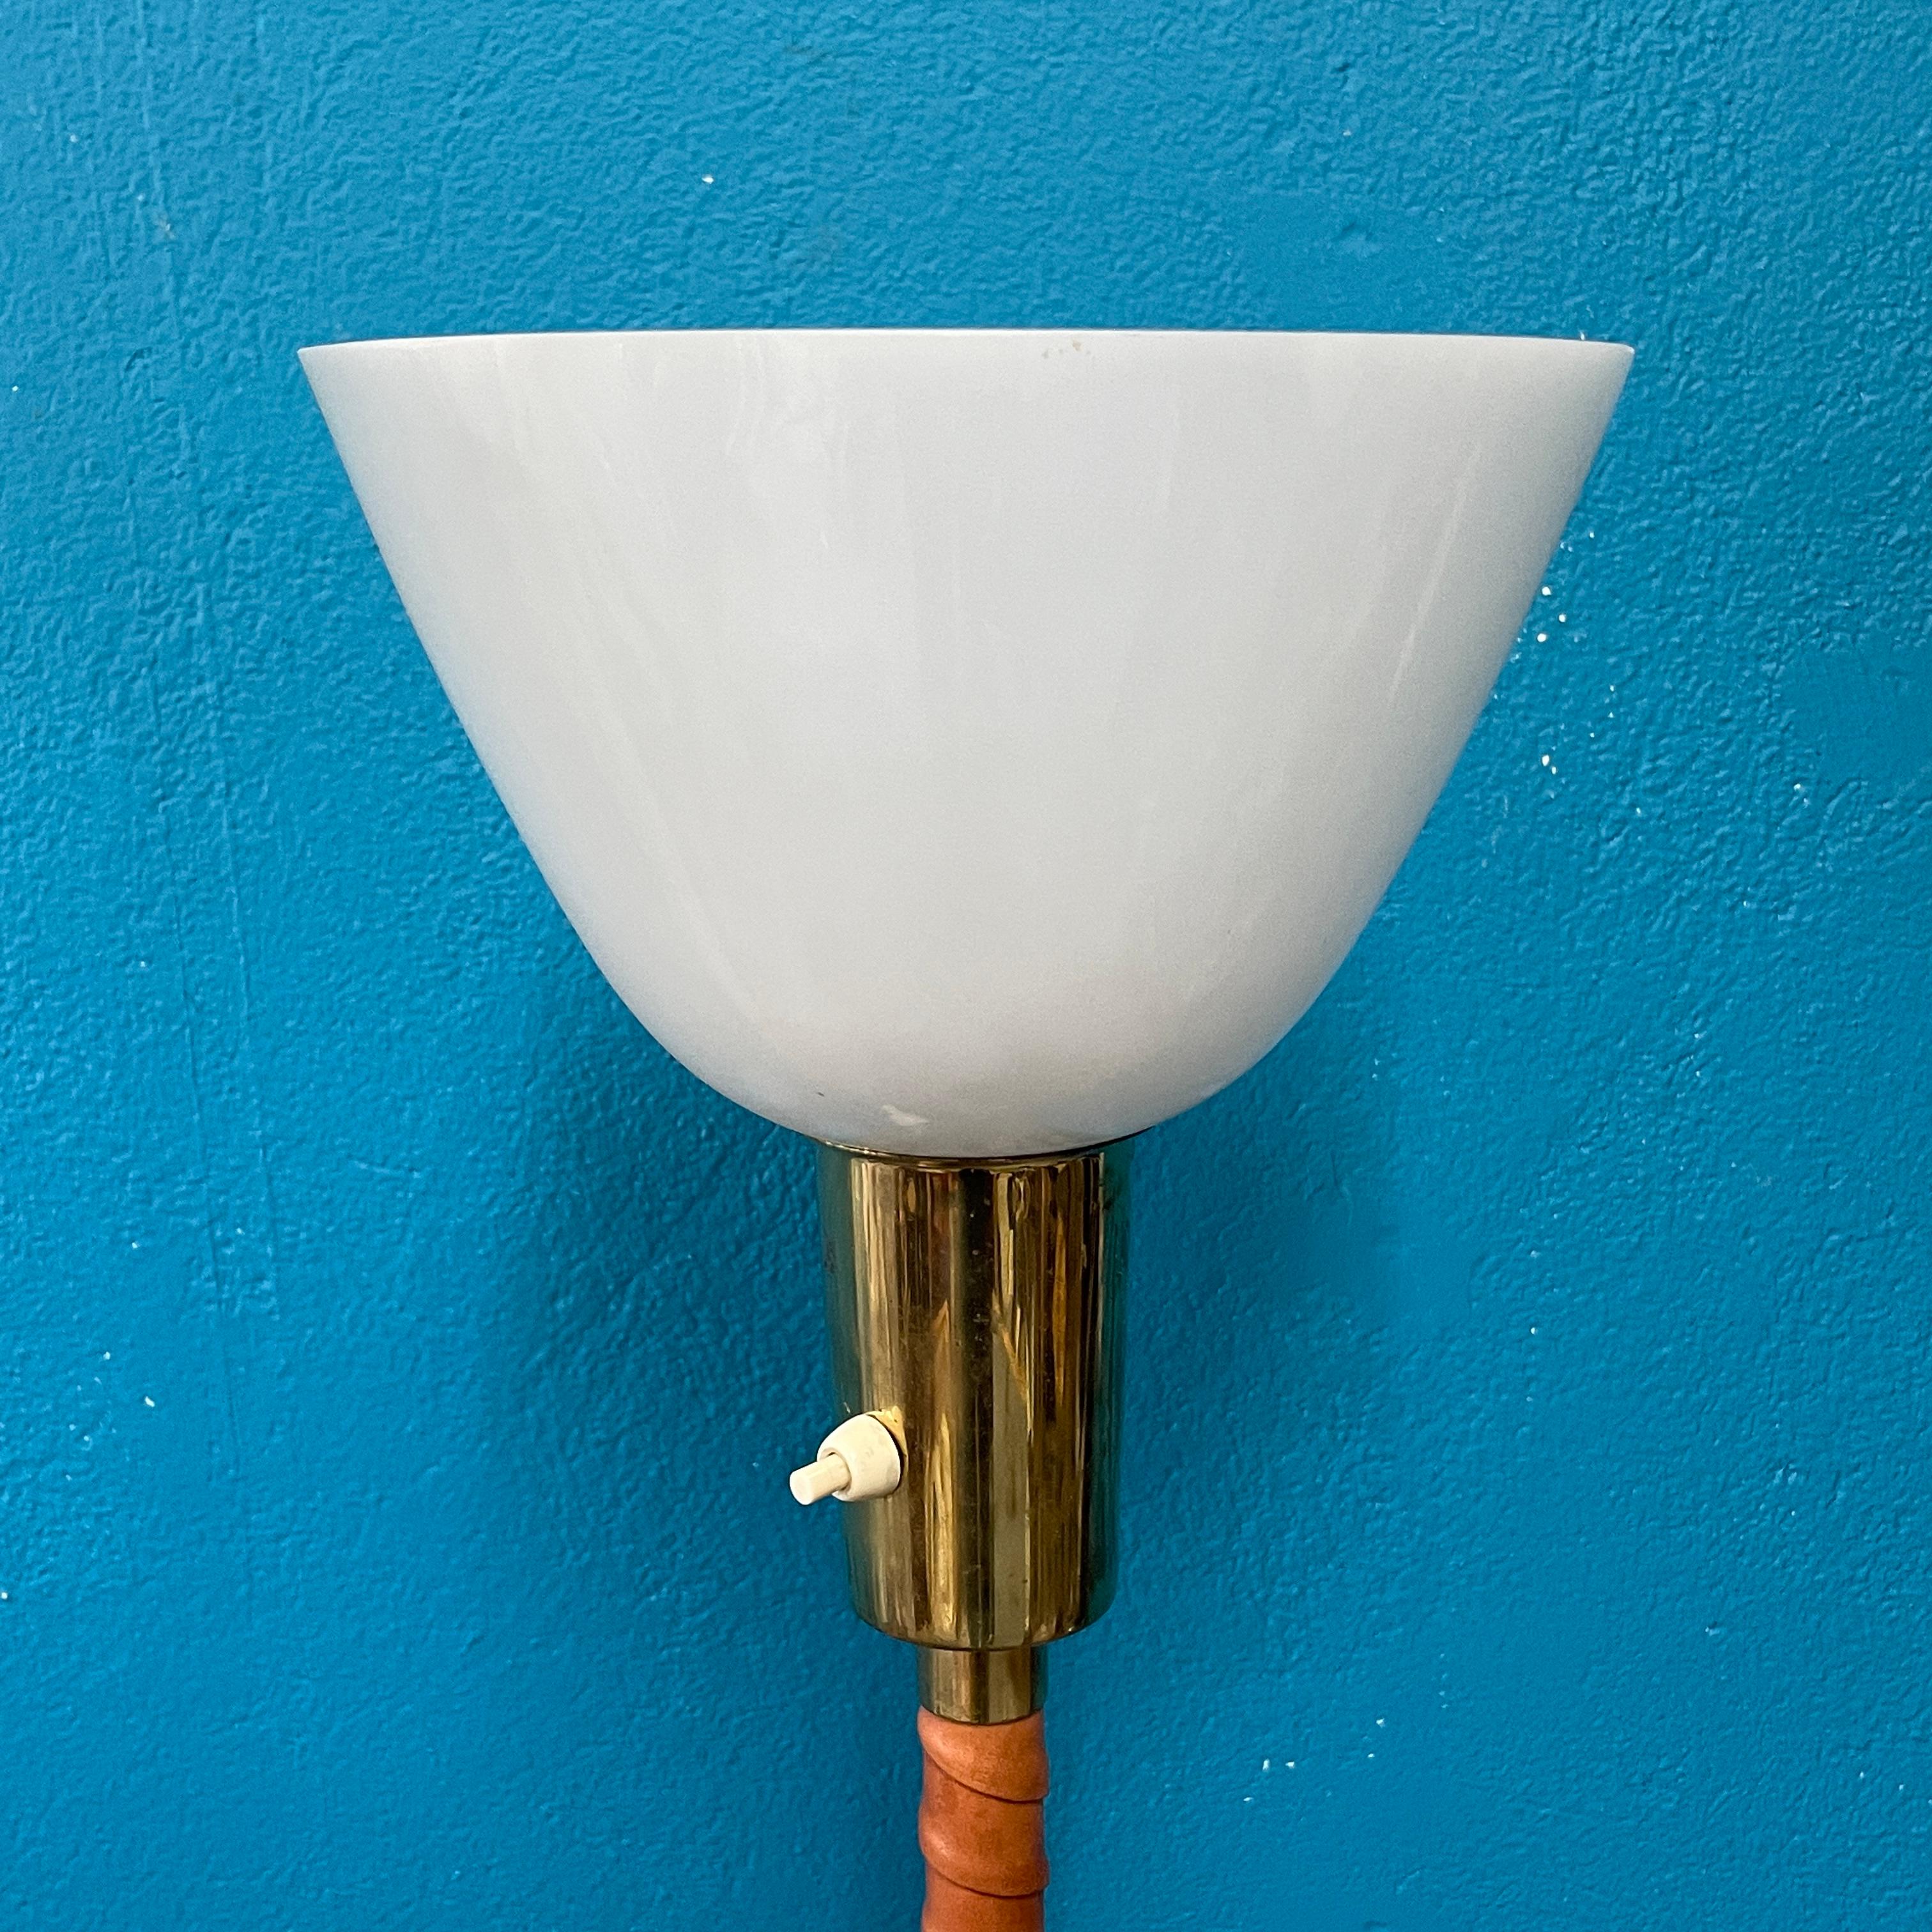 Mid-Century Modern Floor Lamp by Lisa Johansson-Pape, 1950s. Brass and Leather. Orno Finland. For Sale